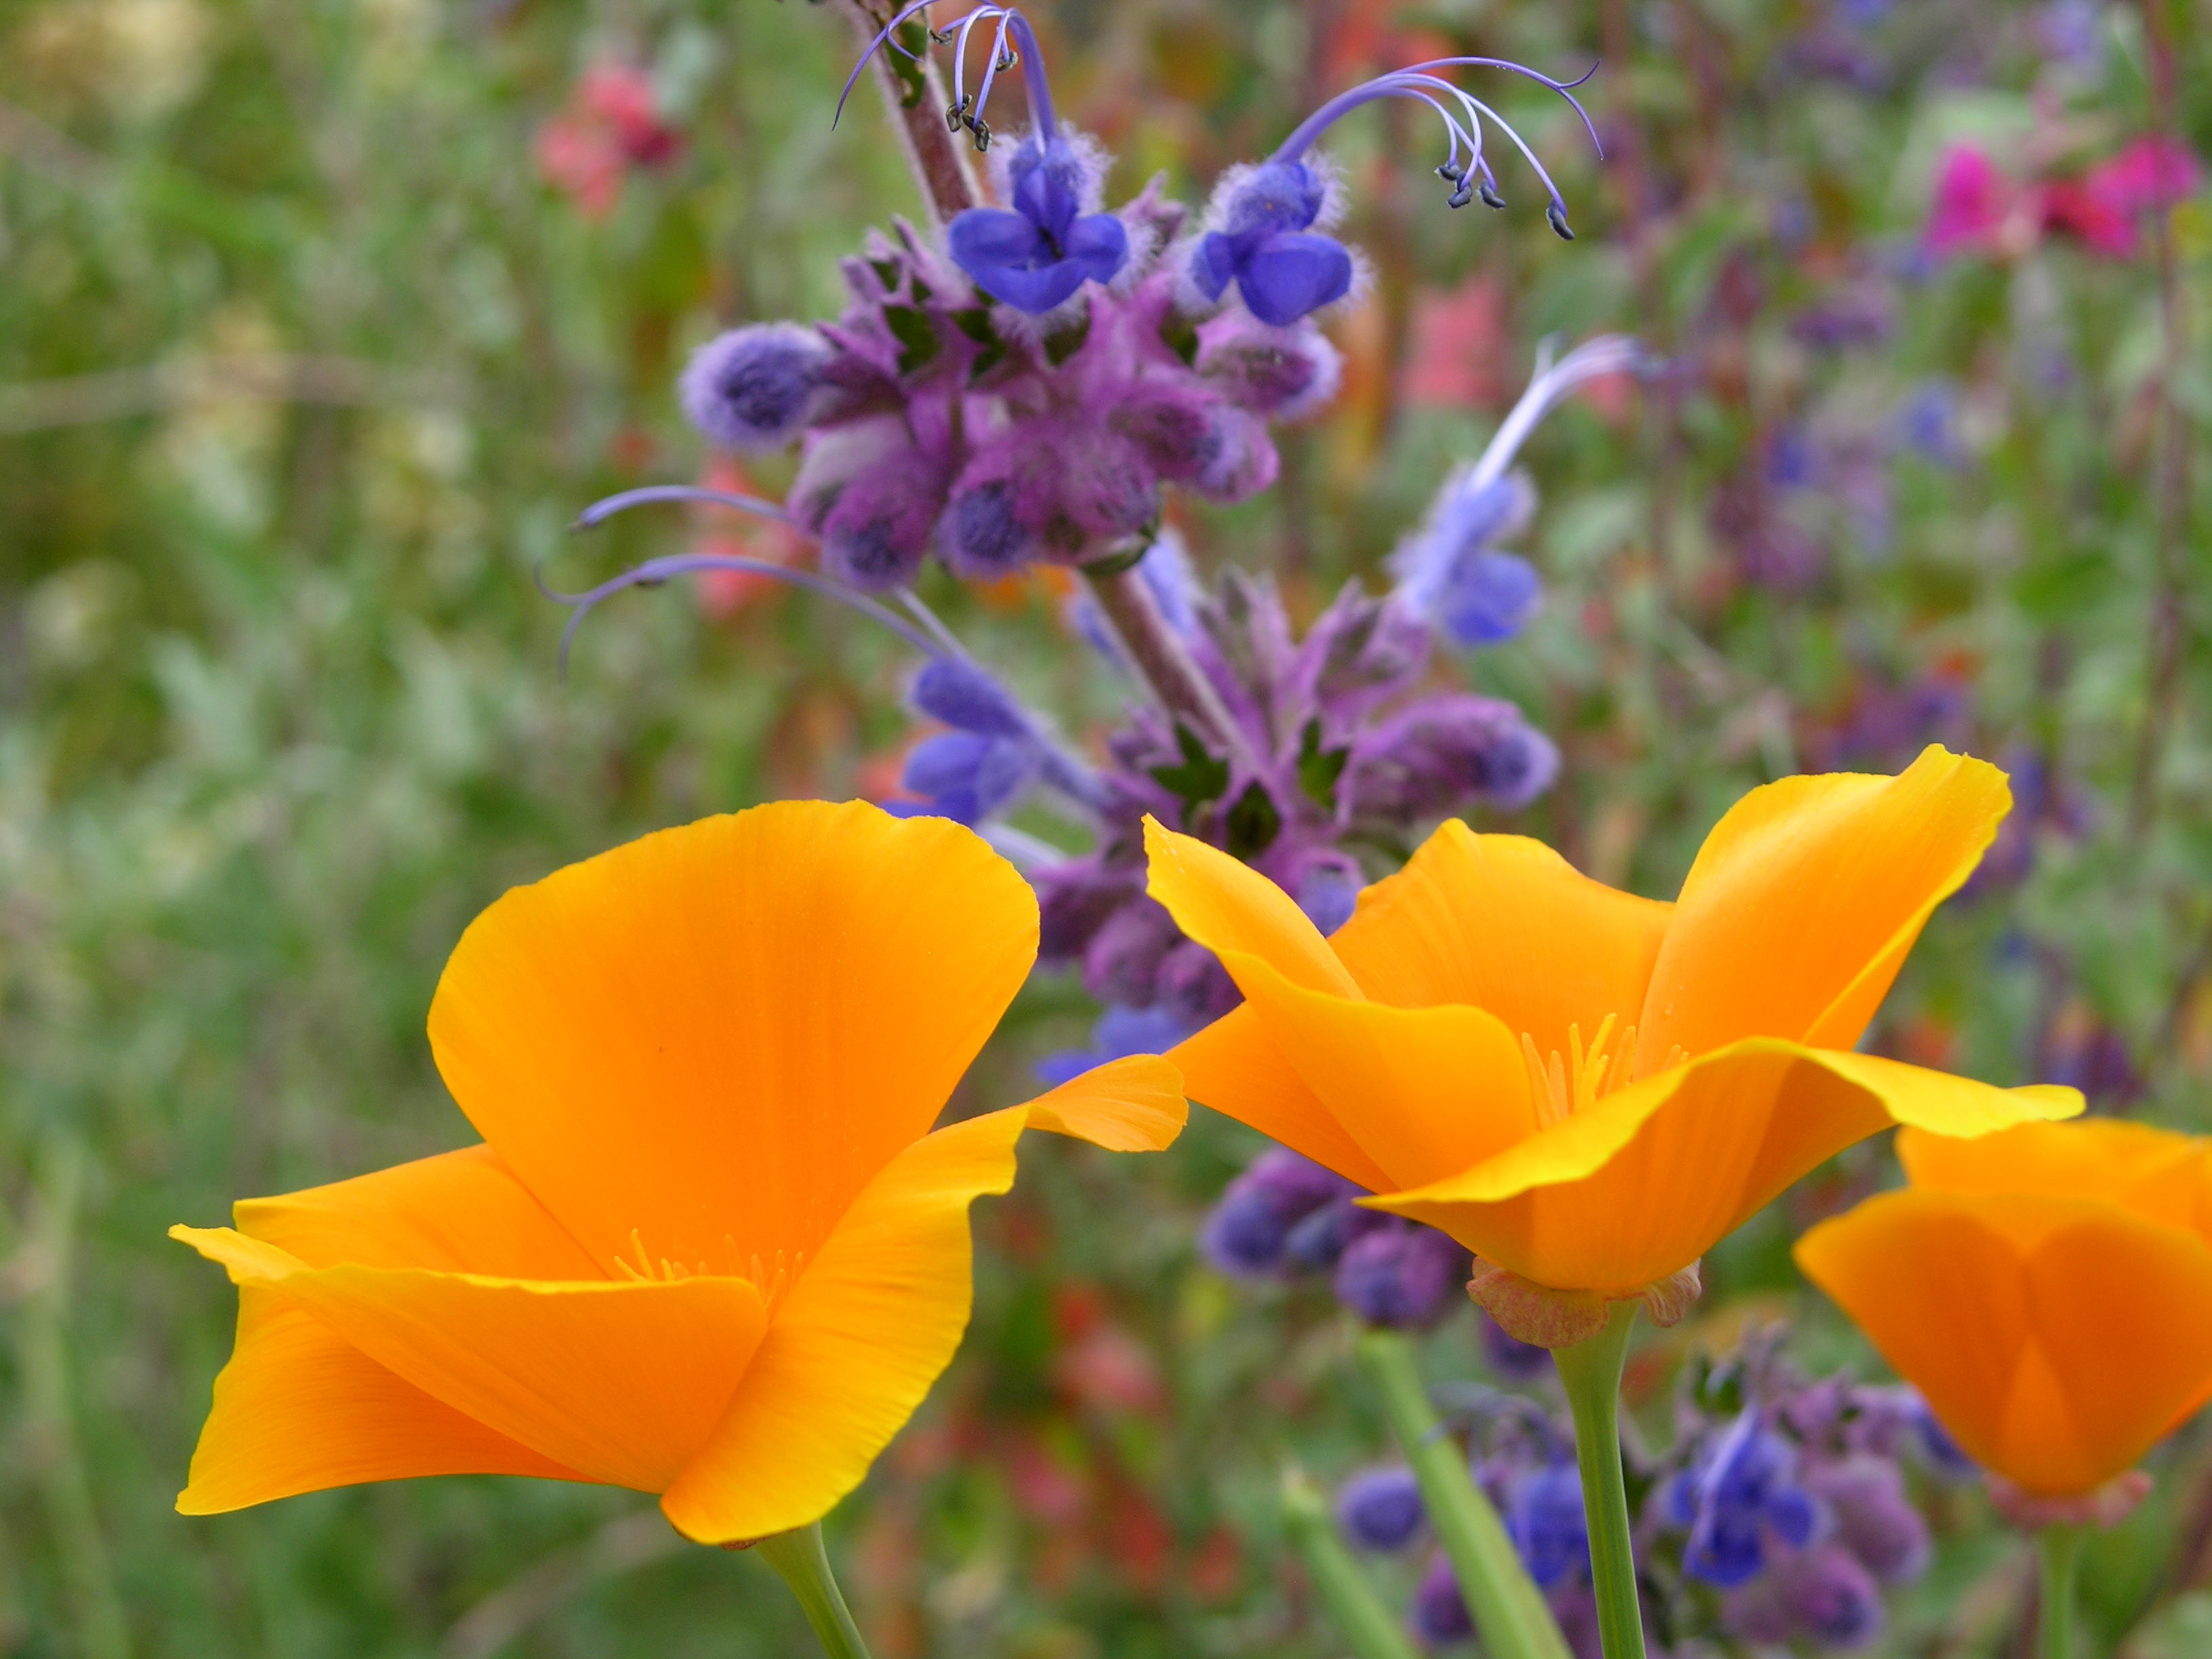 California Poppies and Woolly Blue Curls ©2015 by Ken Gilliland